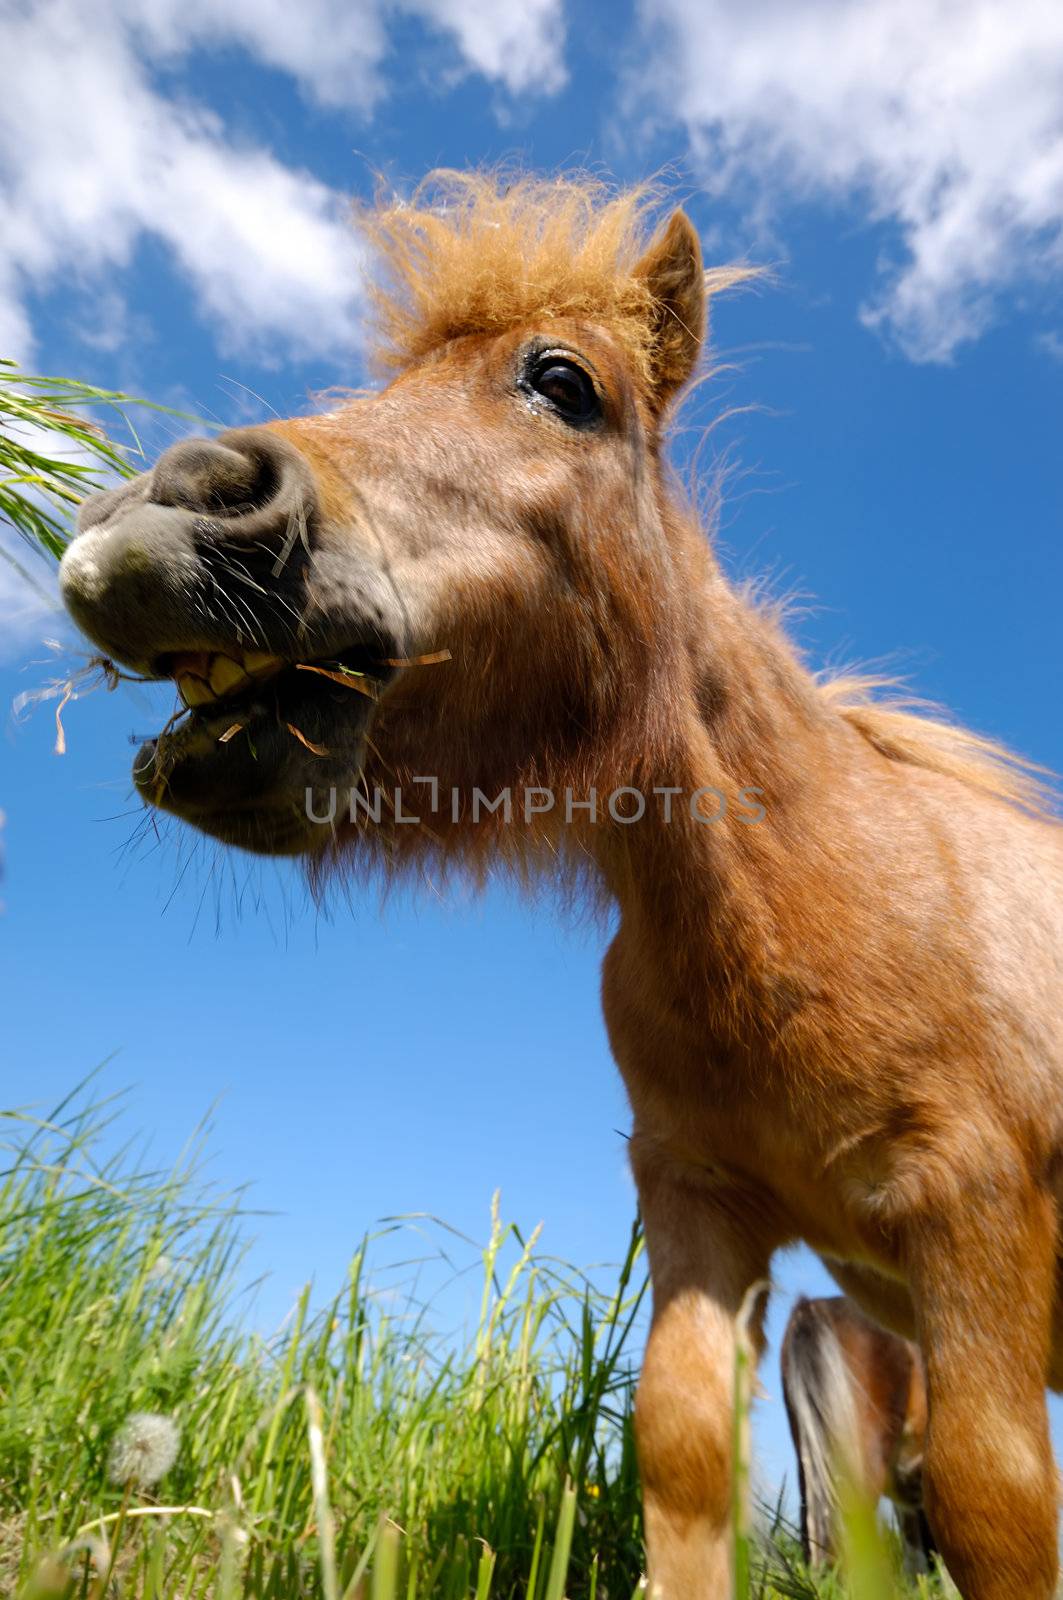 A sweet young horse is eating green grass